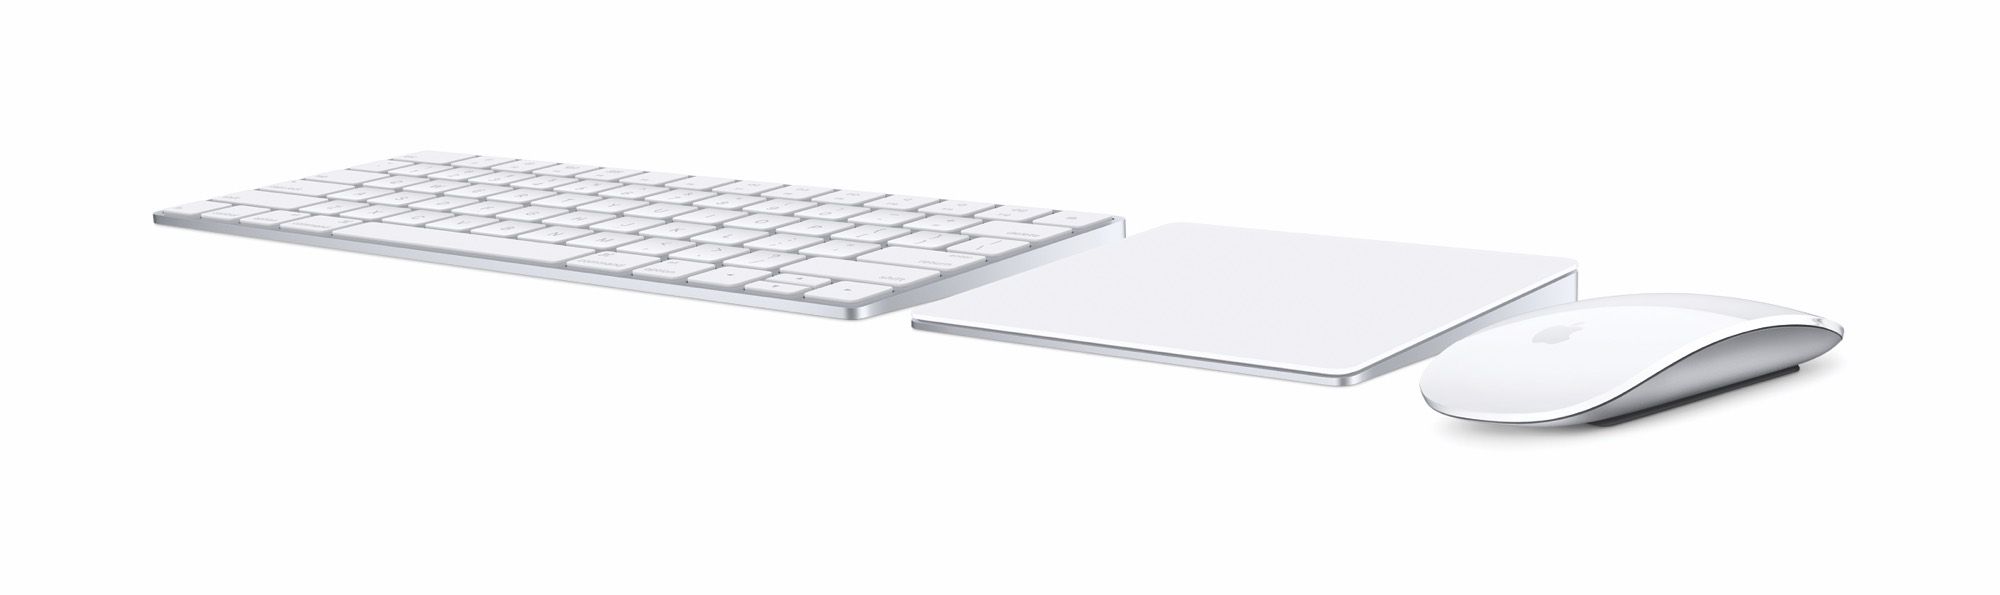 apple brings force touch to desktops alongside new magic keyboard and mouse image 3